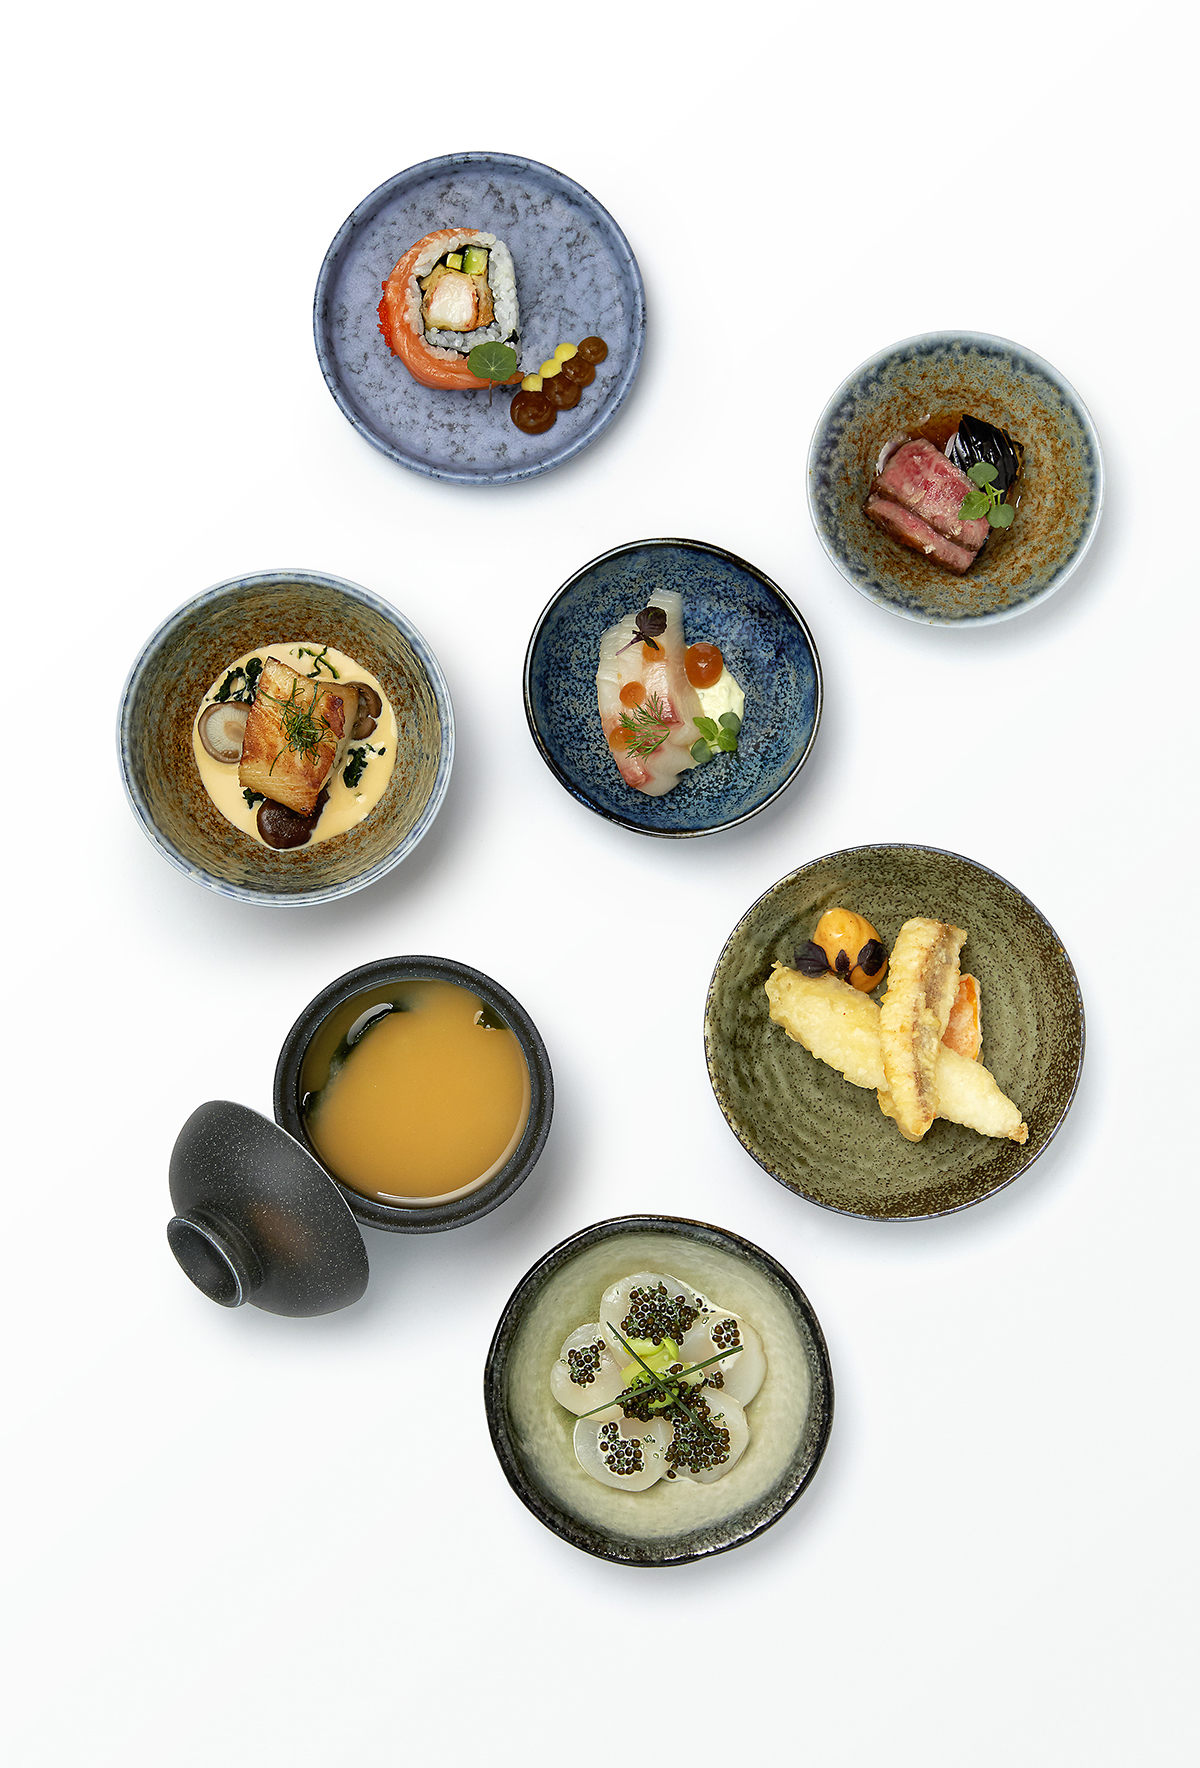 Plates of Japanese food laid on a table